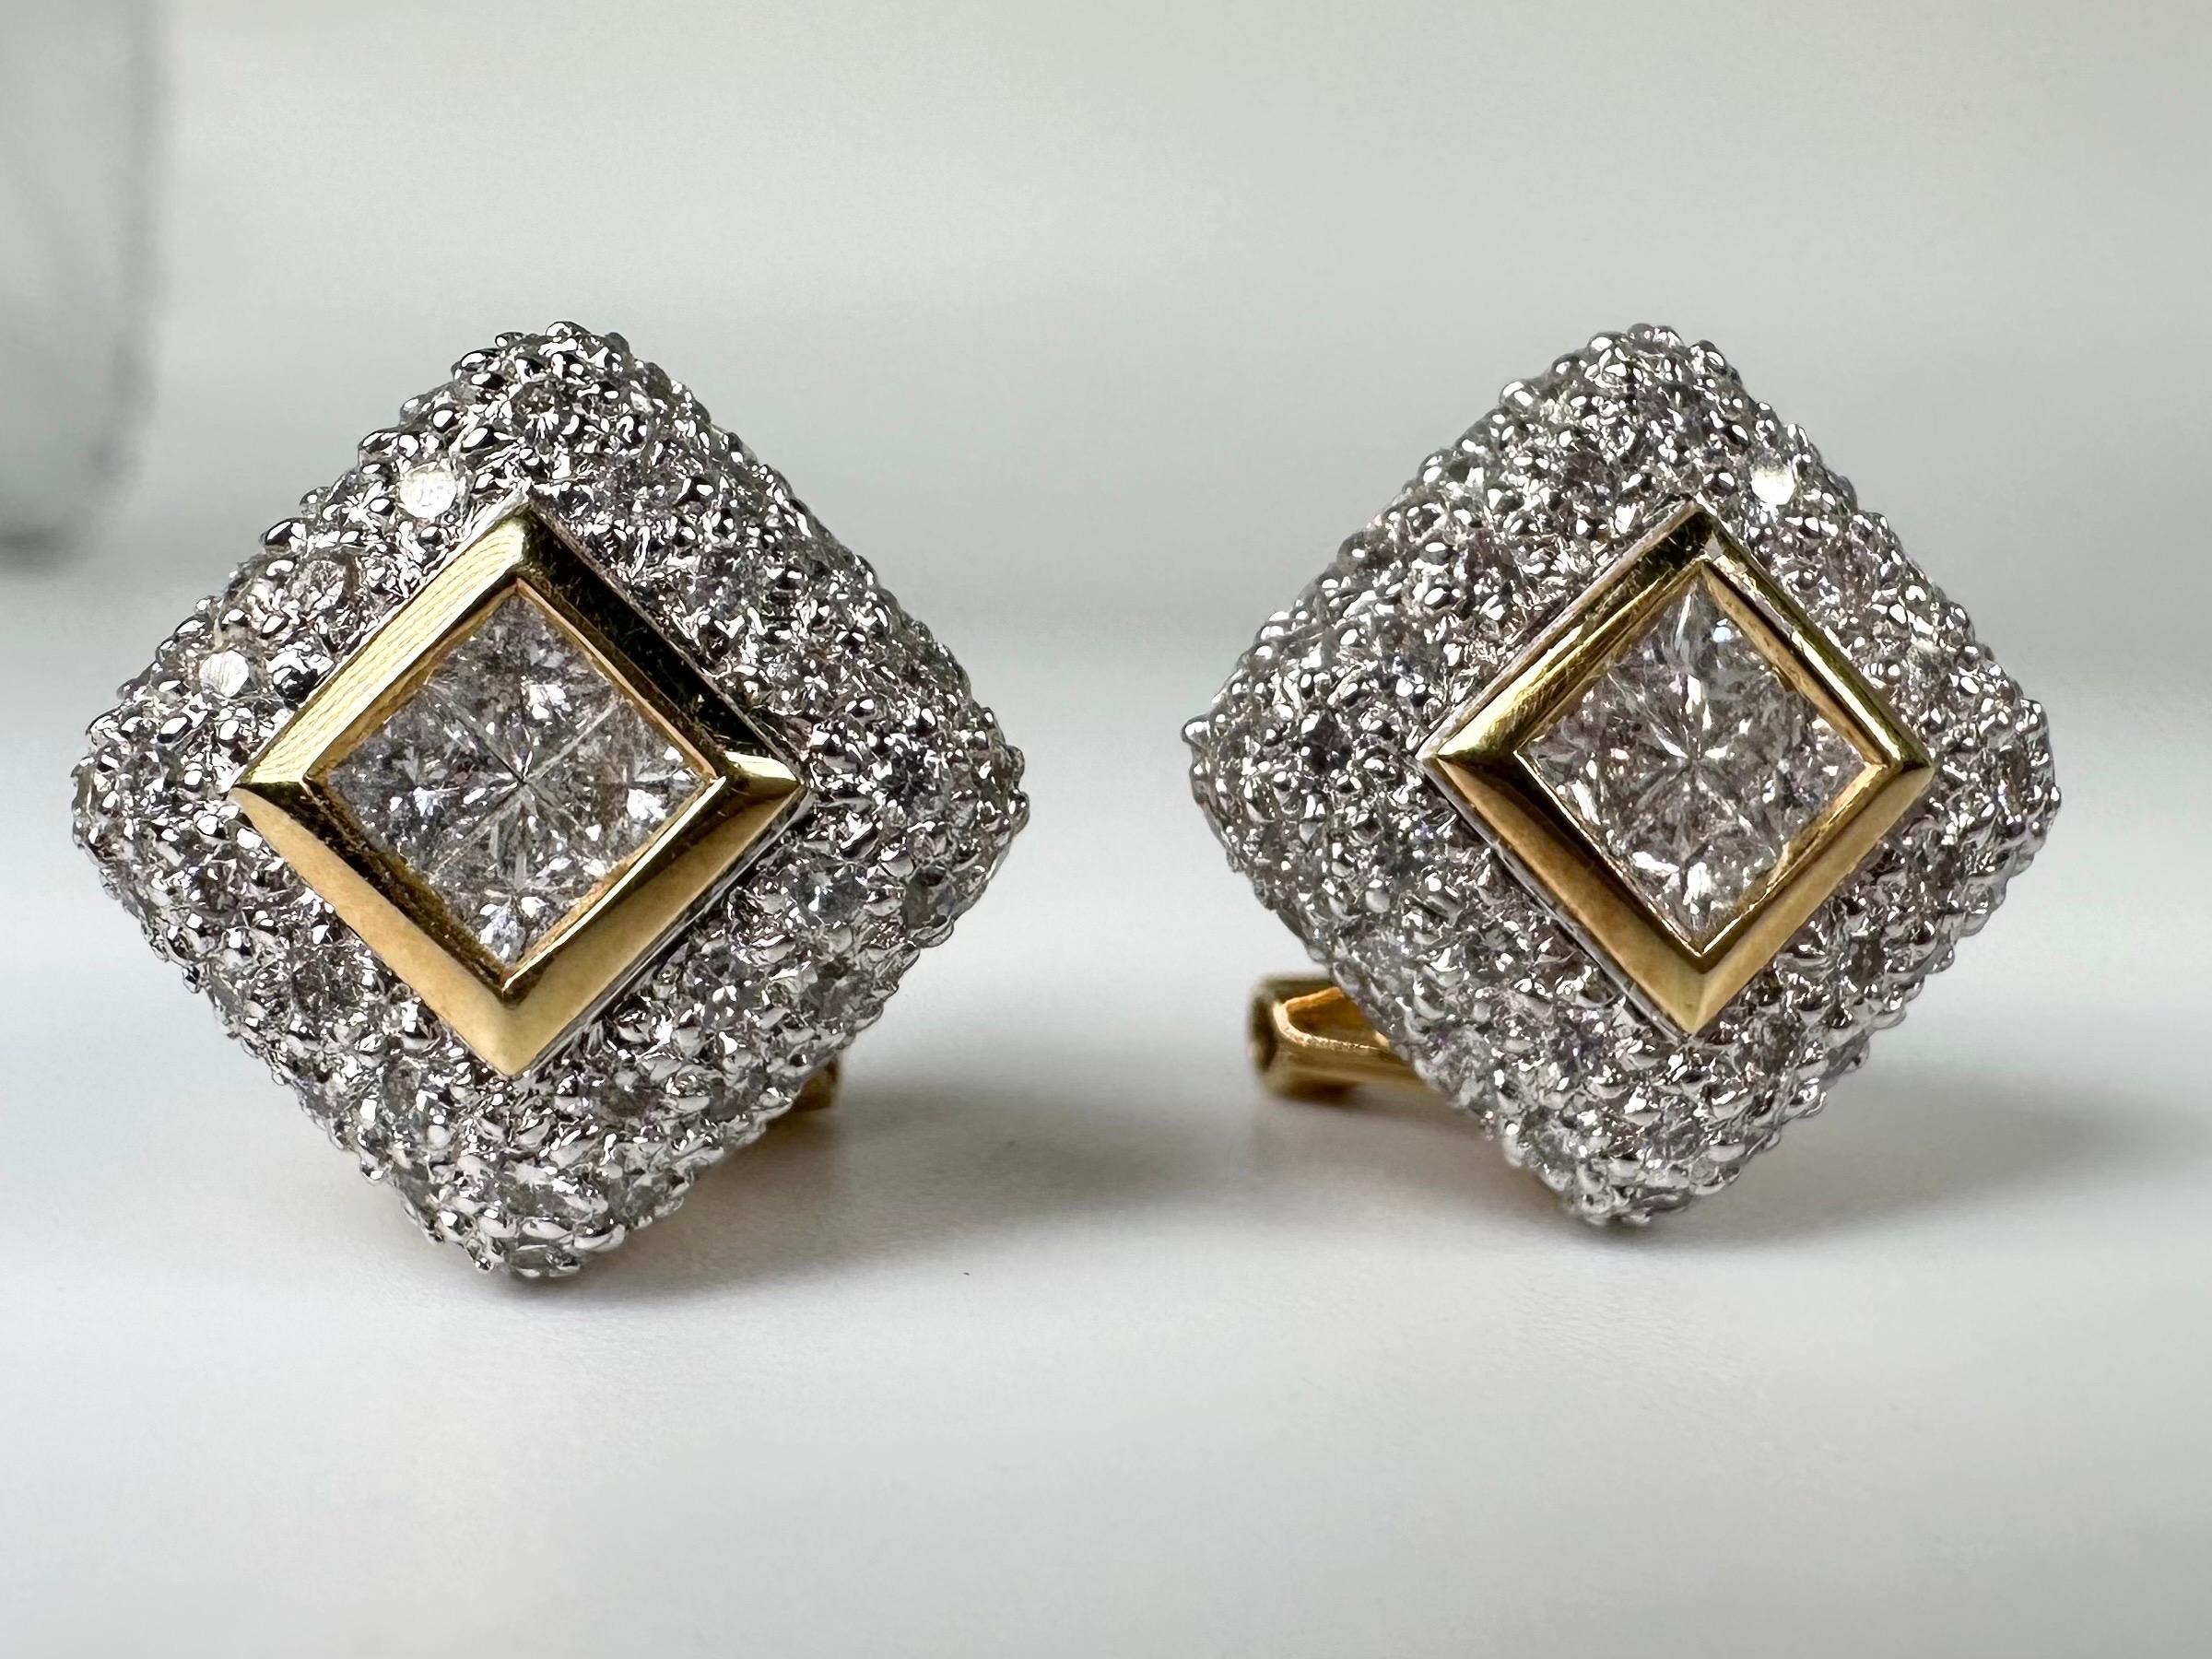 Diamond pave stud earrings in 18kt white and yellow gold. Well made diamond earrings with omega closure!

GOLD: 18KT gold
NATURAL DIAMOND(S)
Clarity/Color: VS-SI/F-G
Carat:1.51ct
Cut:Round Brilliant
Grams:8.32
Backing: omega
Item:kkrp

WHAT YOU GET